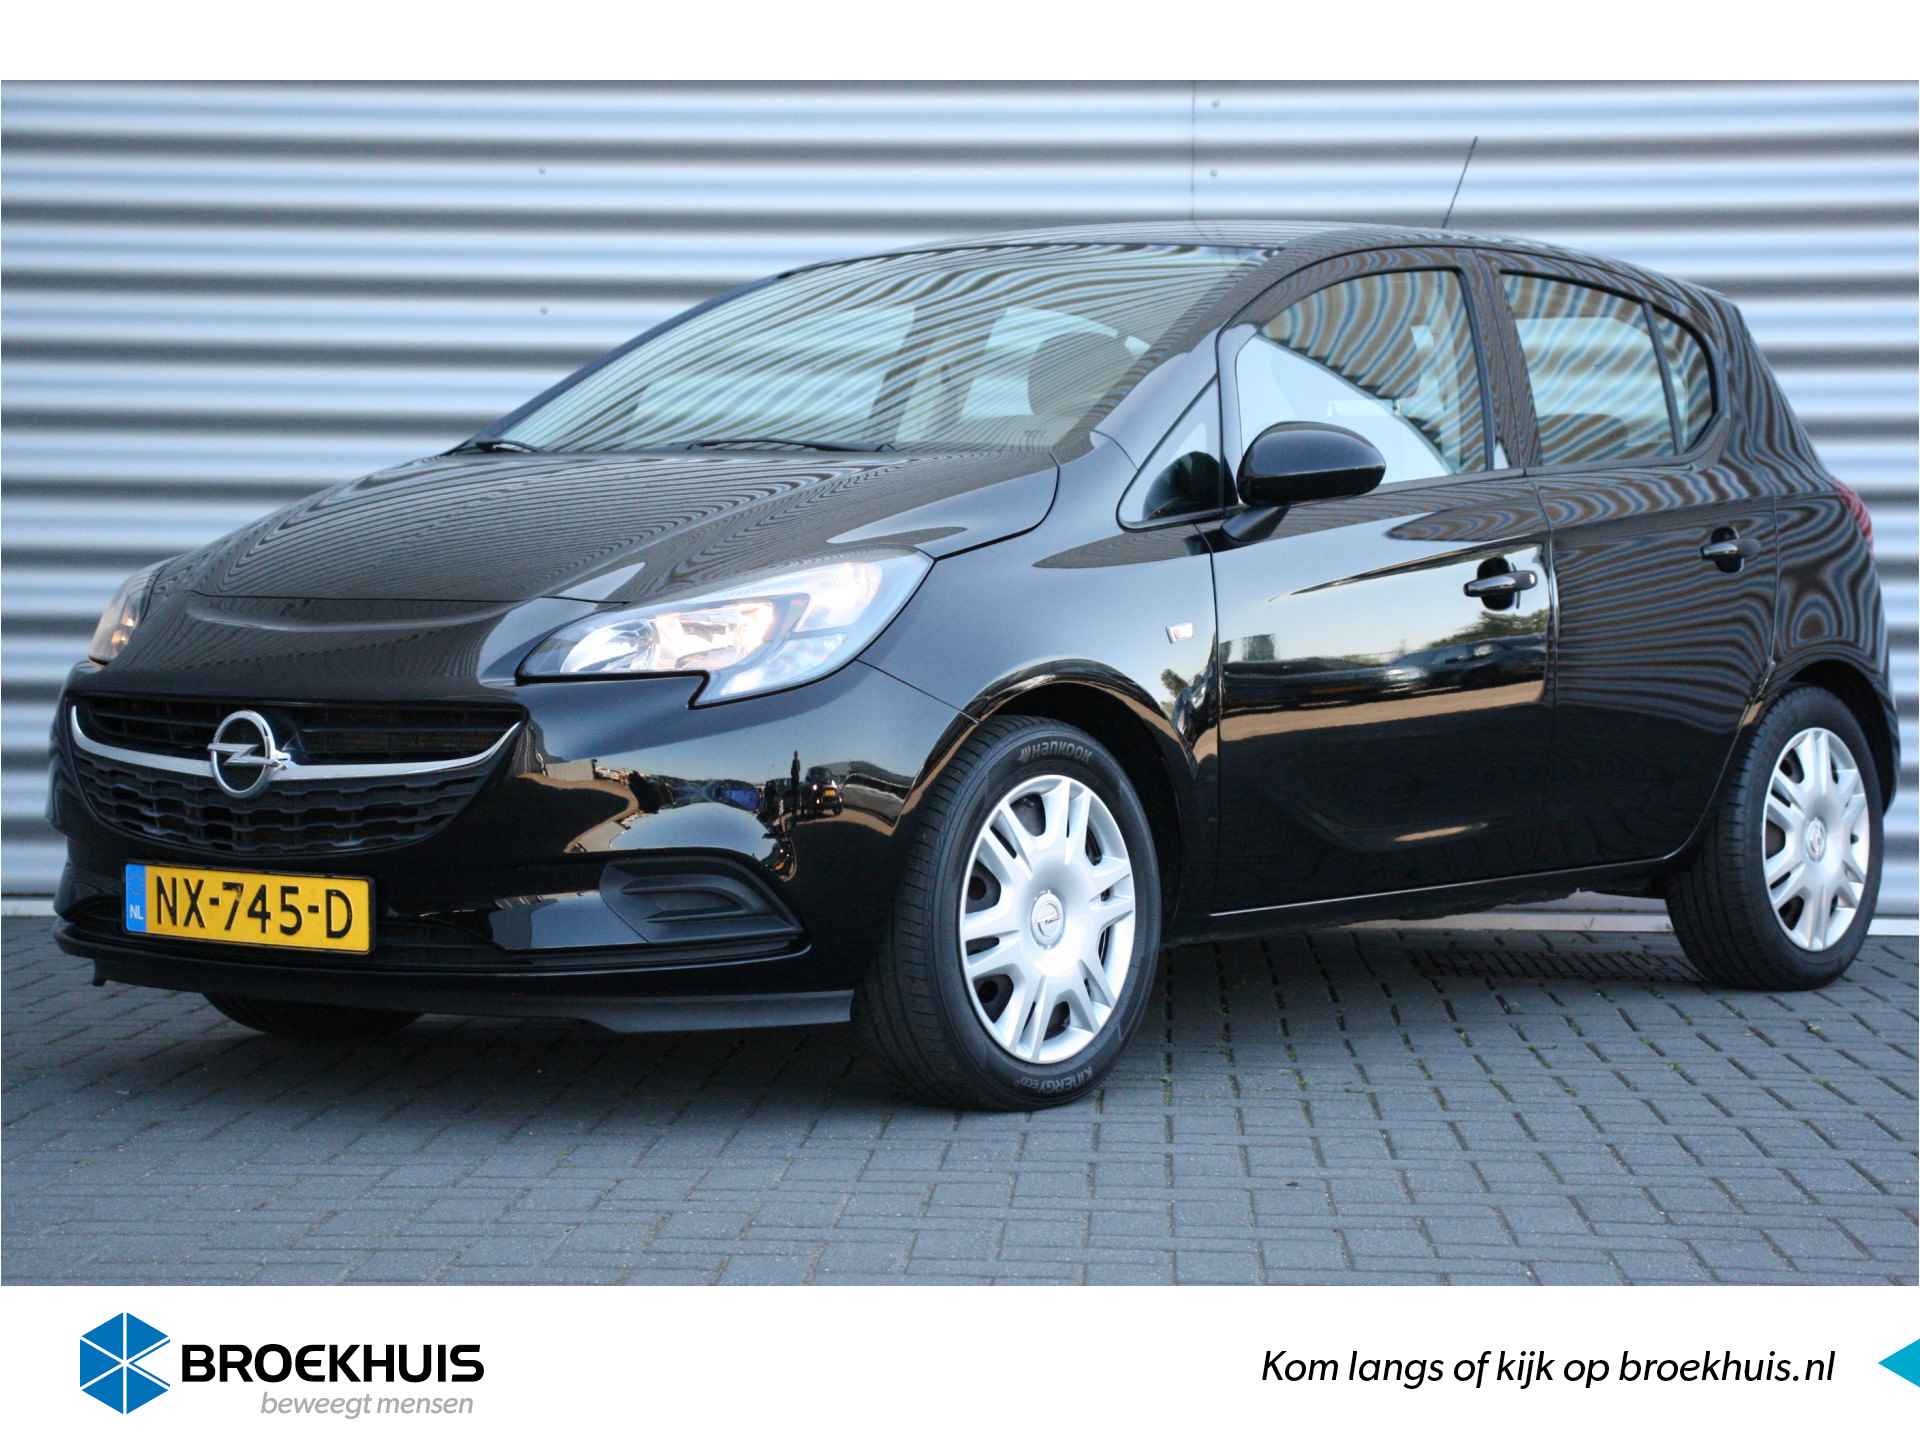 Opel Corsa 1.4 90PK 5-DRS ONLINE EDITION+ / AIRCO / LED / BLUETOOTH / CRUISECONTROL / NIEUWSTAAT ! - 1/27